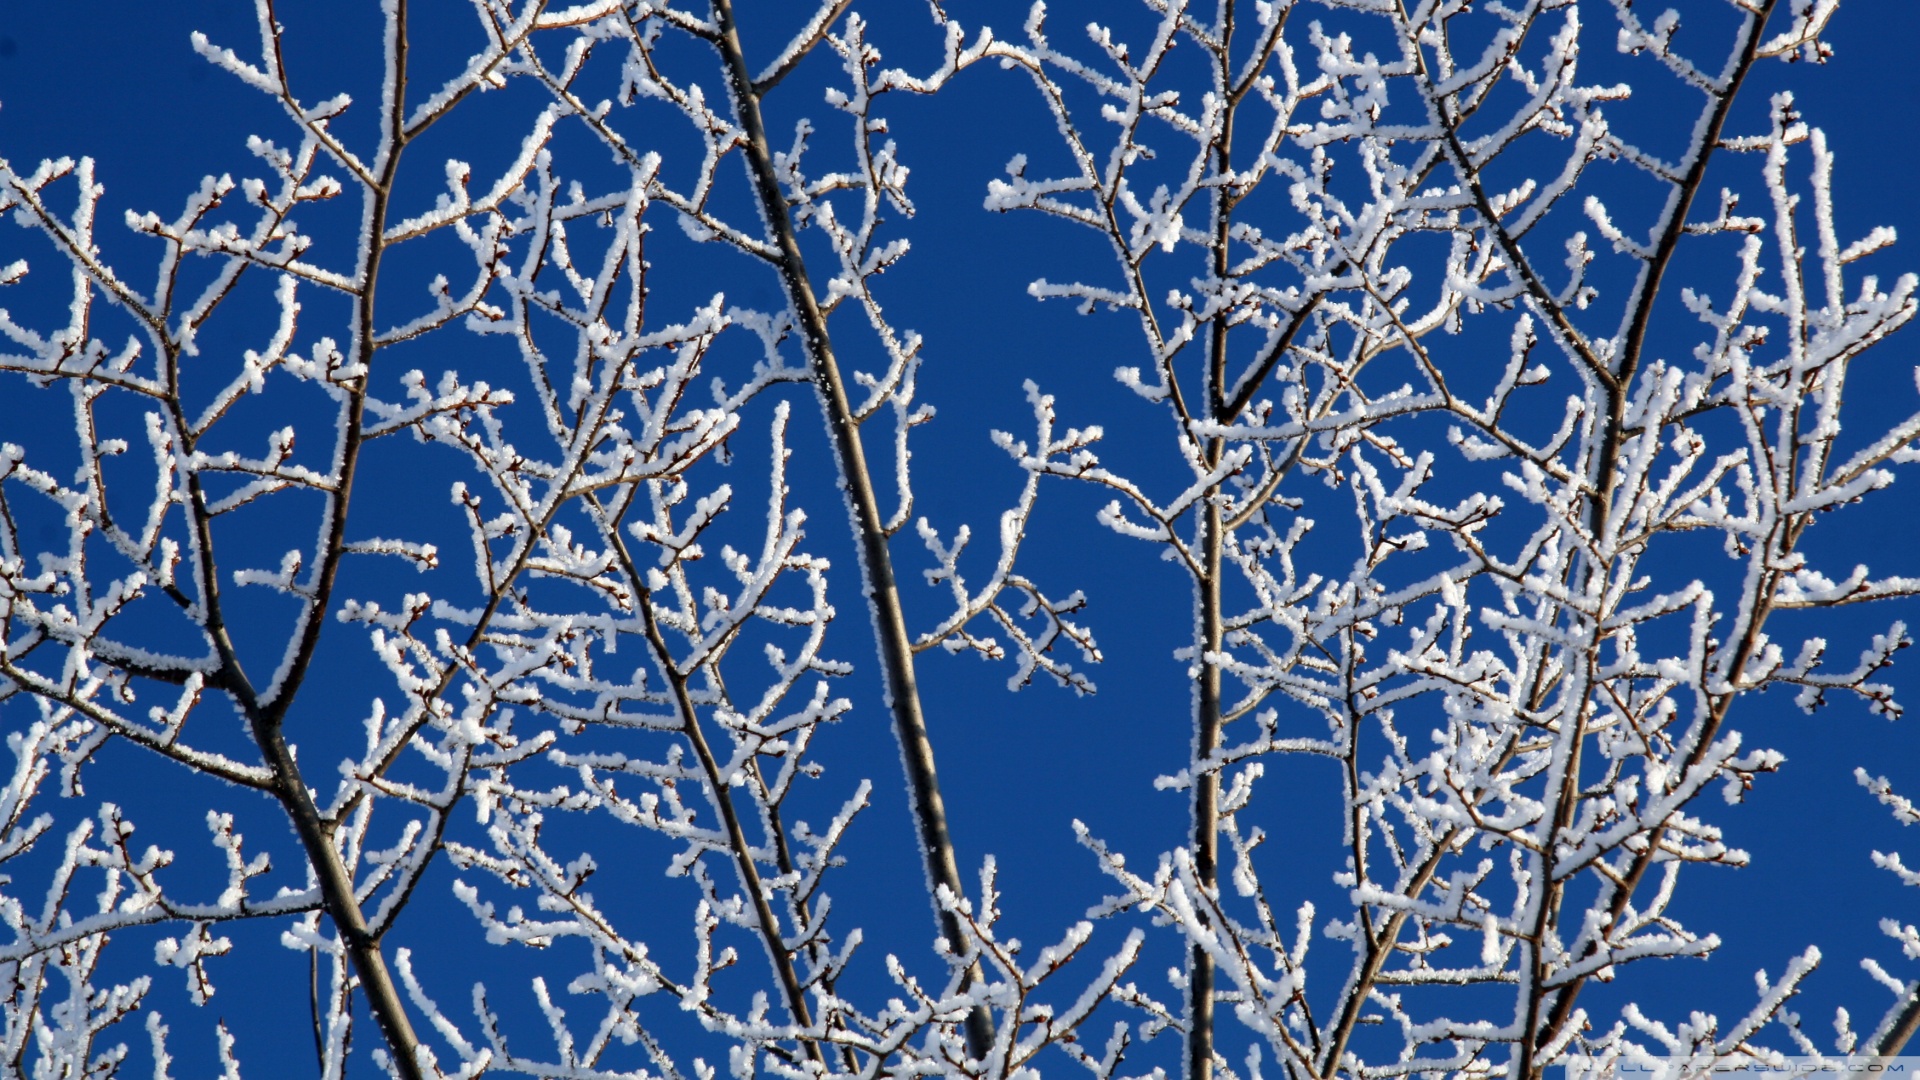 Snowy Tree Branches Wallpaper 1920x1080 Snowy Tree Branches